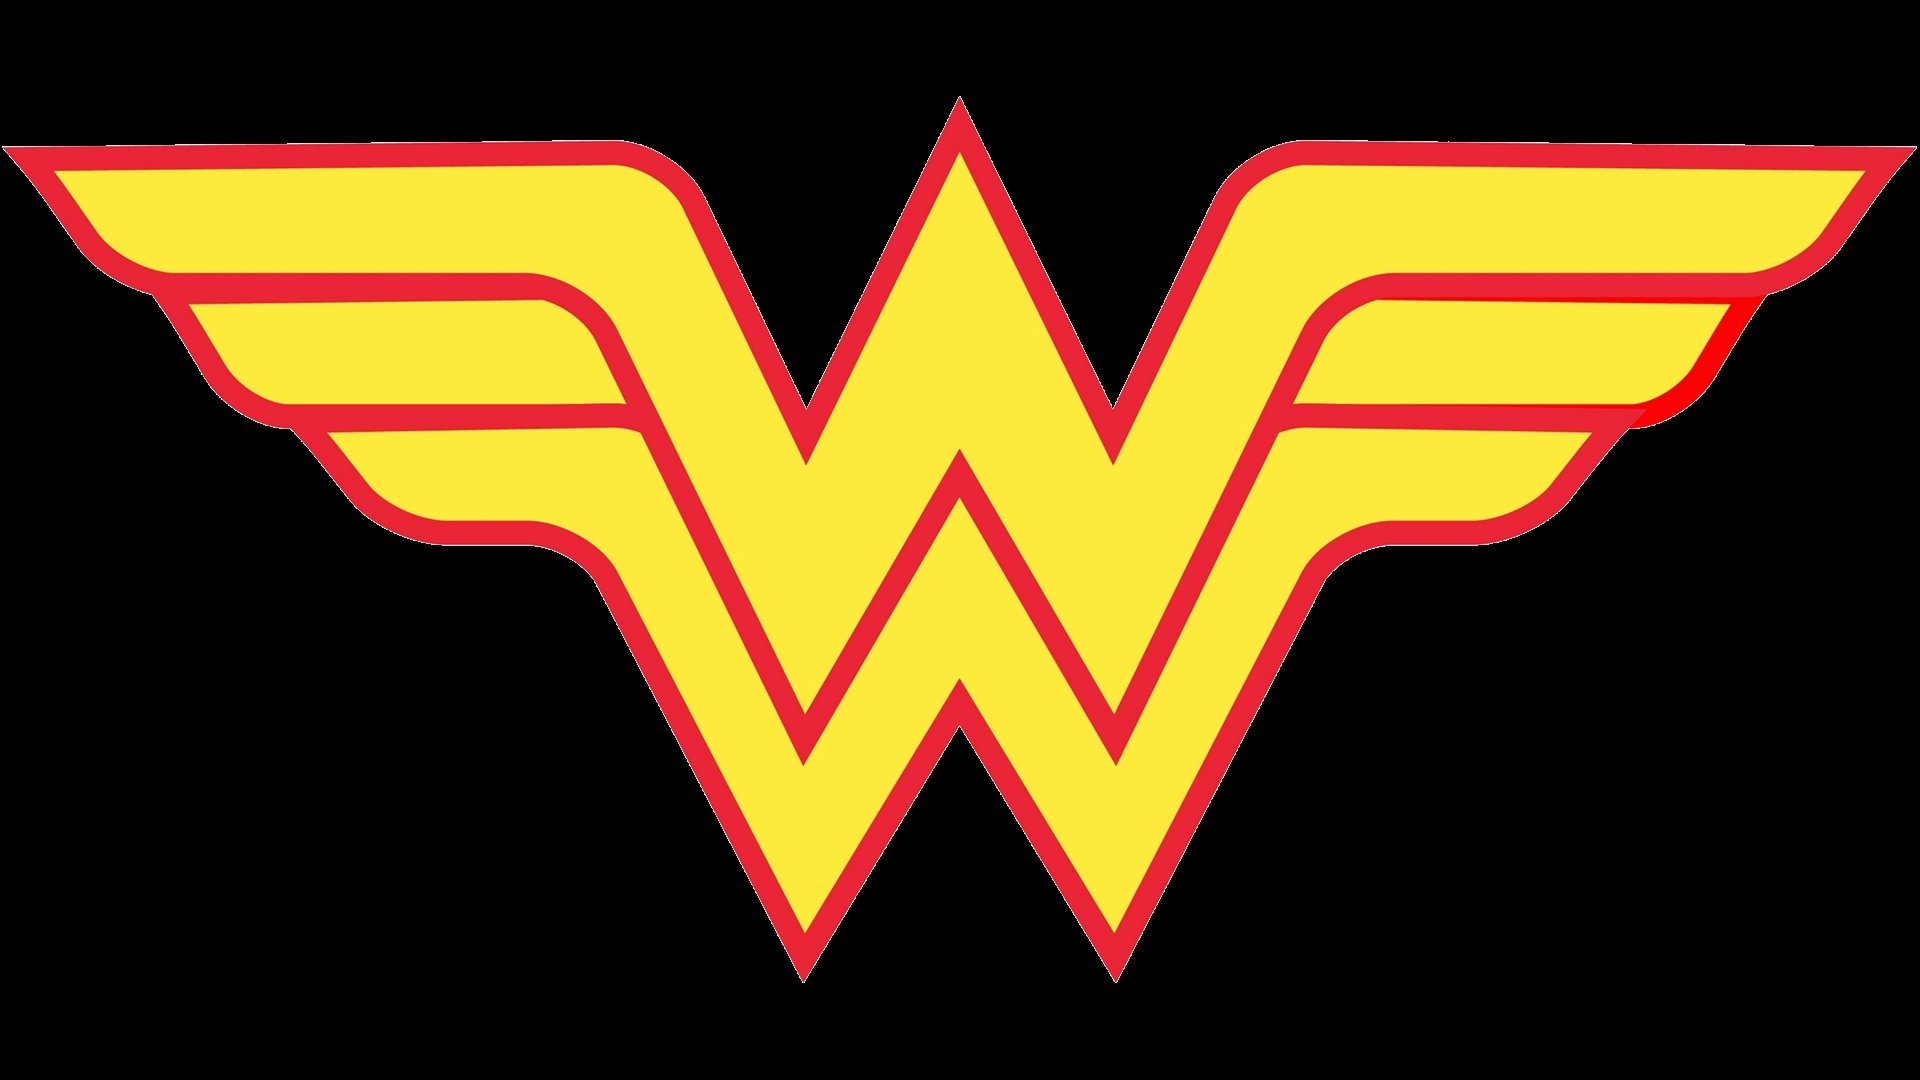 341 Wonder Woman HD Wallpapers | Backgrounds - Wallpaper Abyss